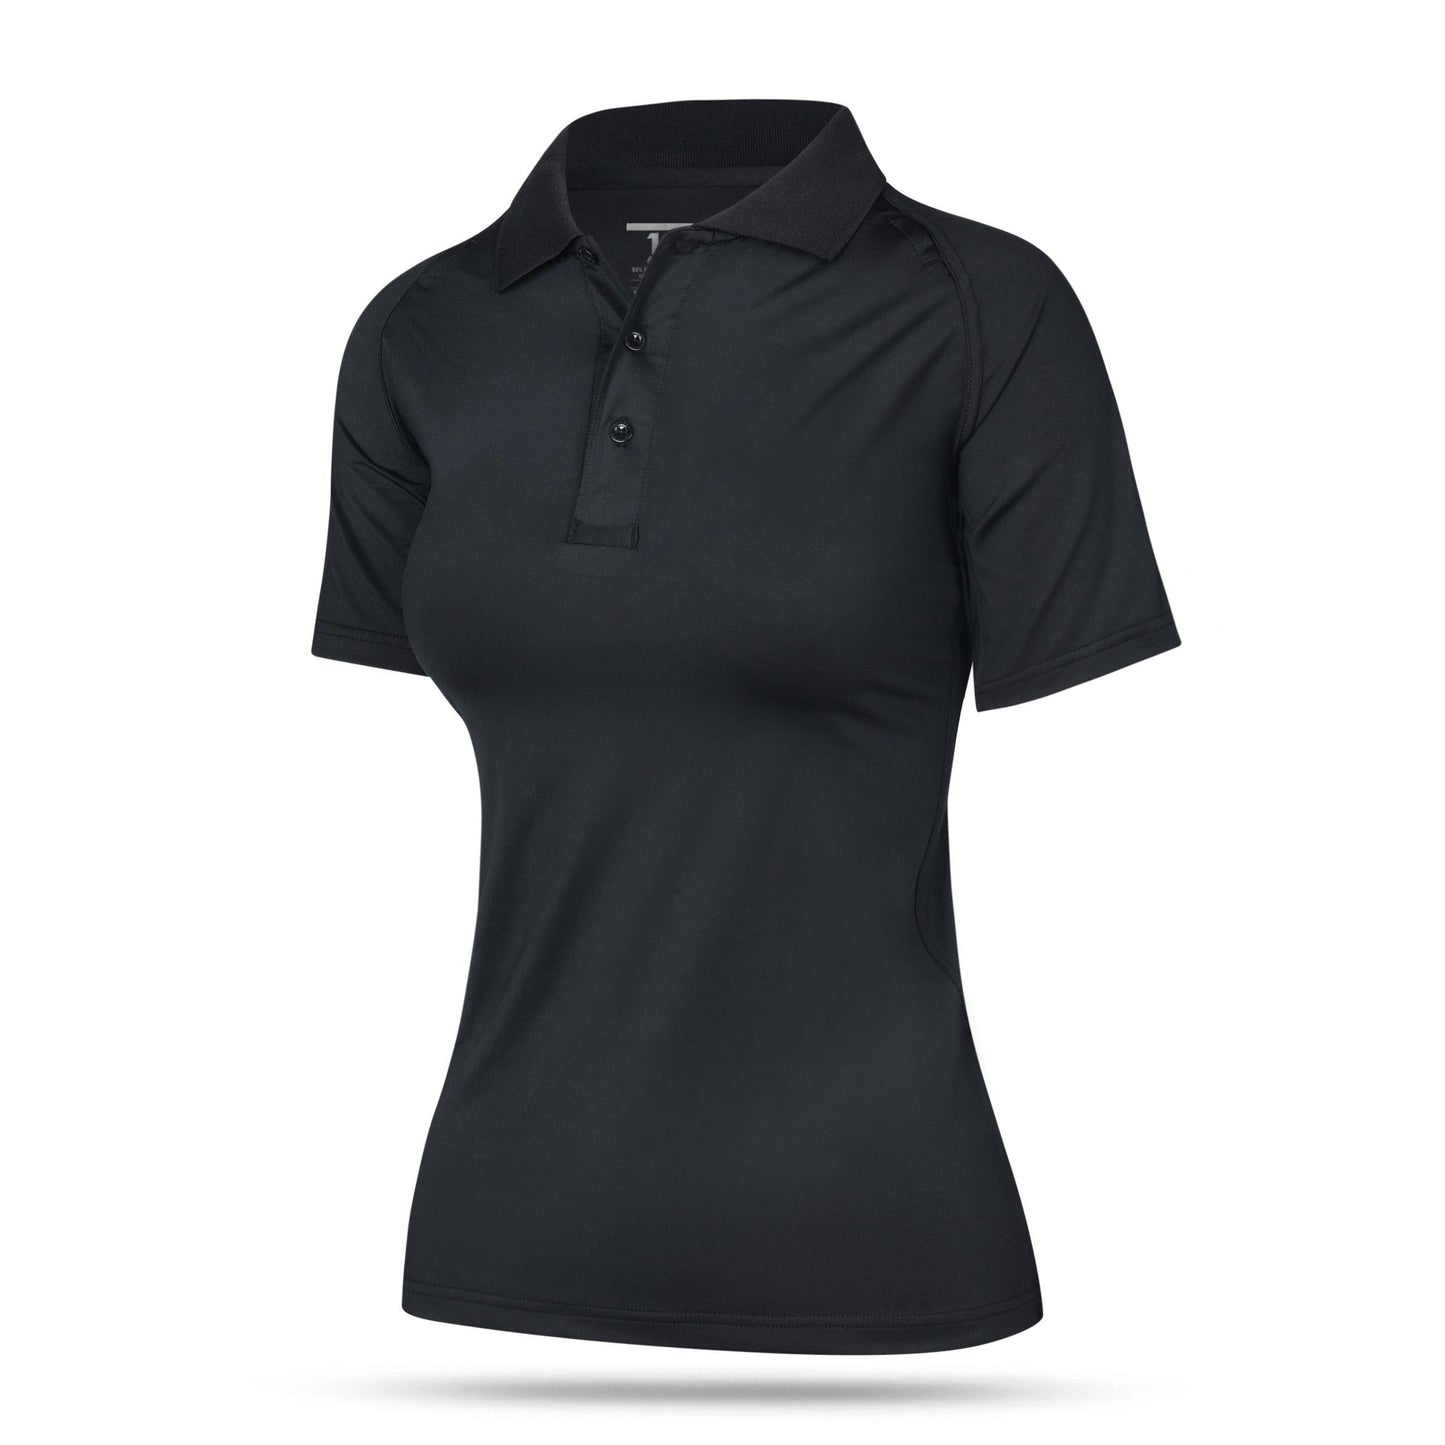 [UNMARKED] Women's Performance Polo [BLK]-13 Fifty Apparel